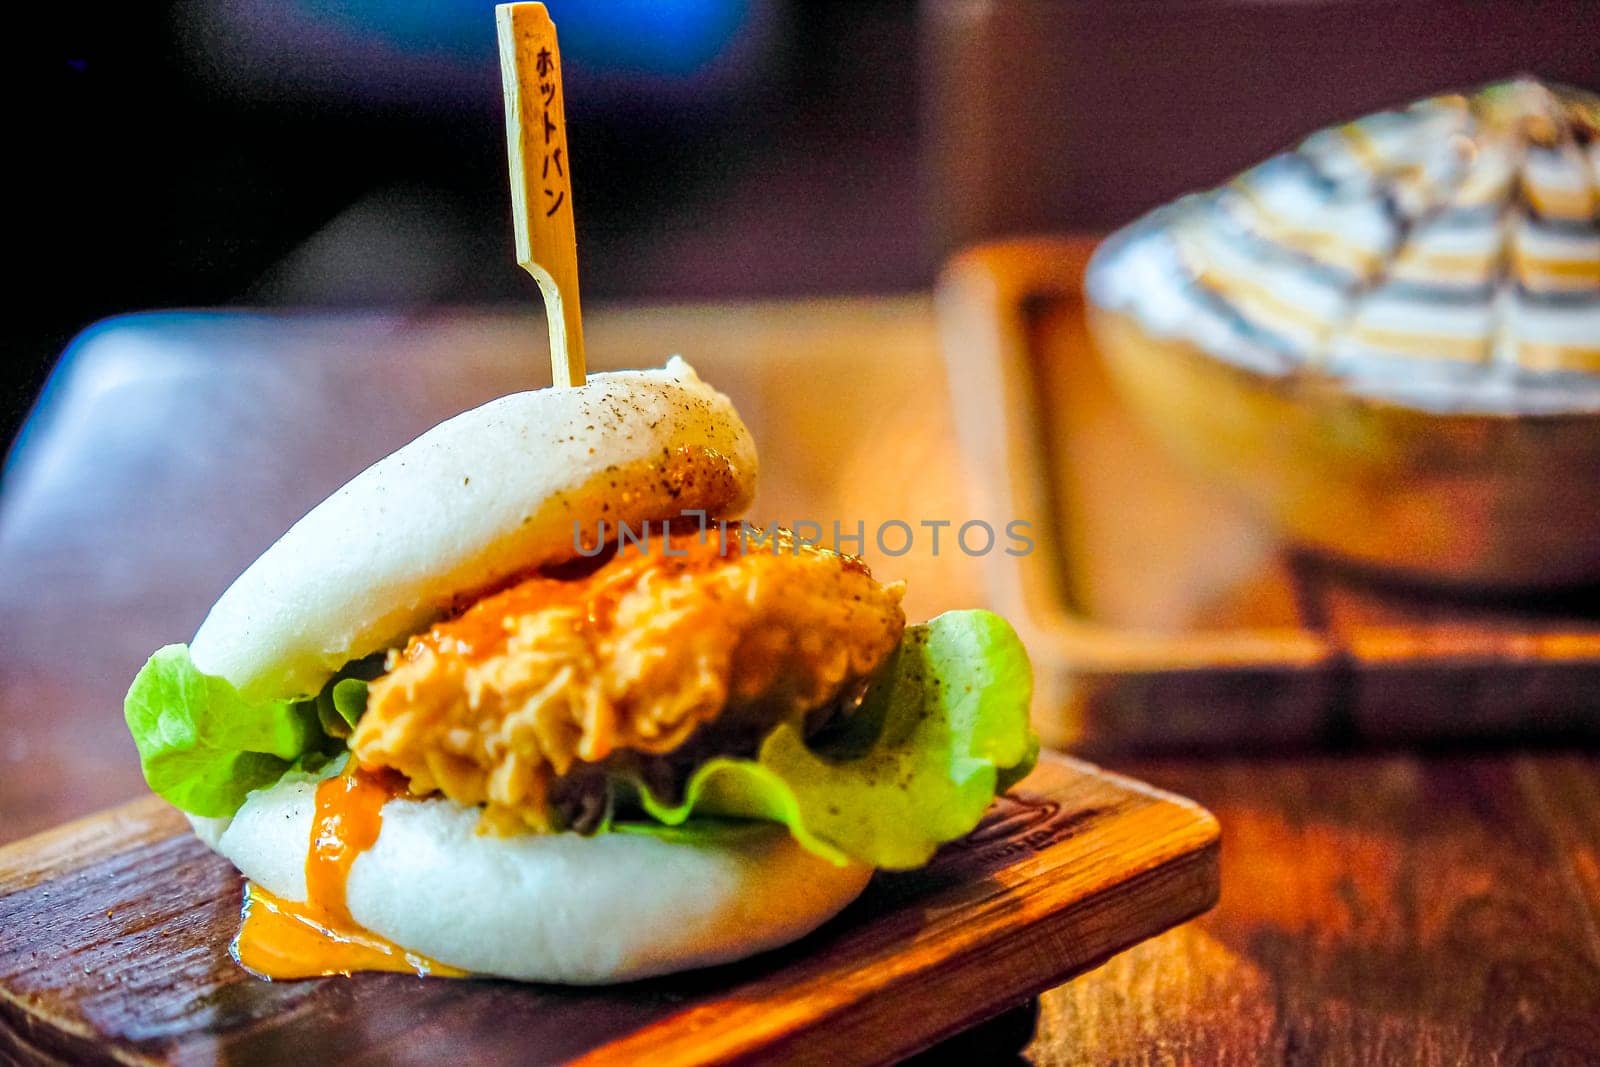 Bao Burger Bonanza: Bob's Flavorful Steamed Buns with Crunchy Slaw and Pickles by Petrichor